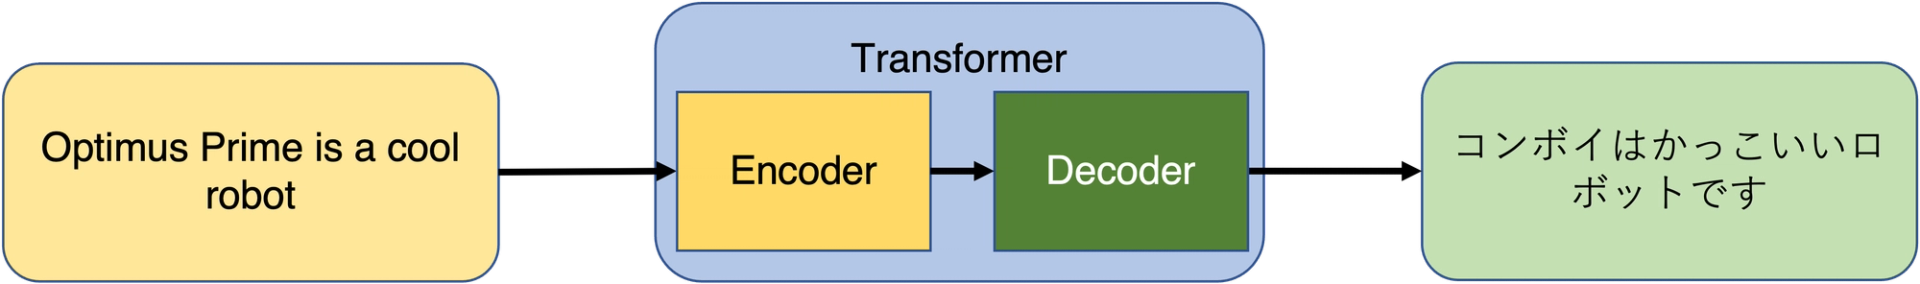 Encoders and Decoders within a Transformer